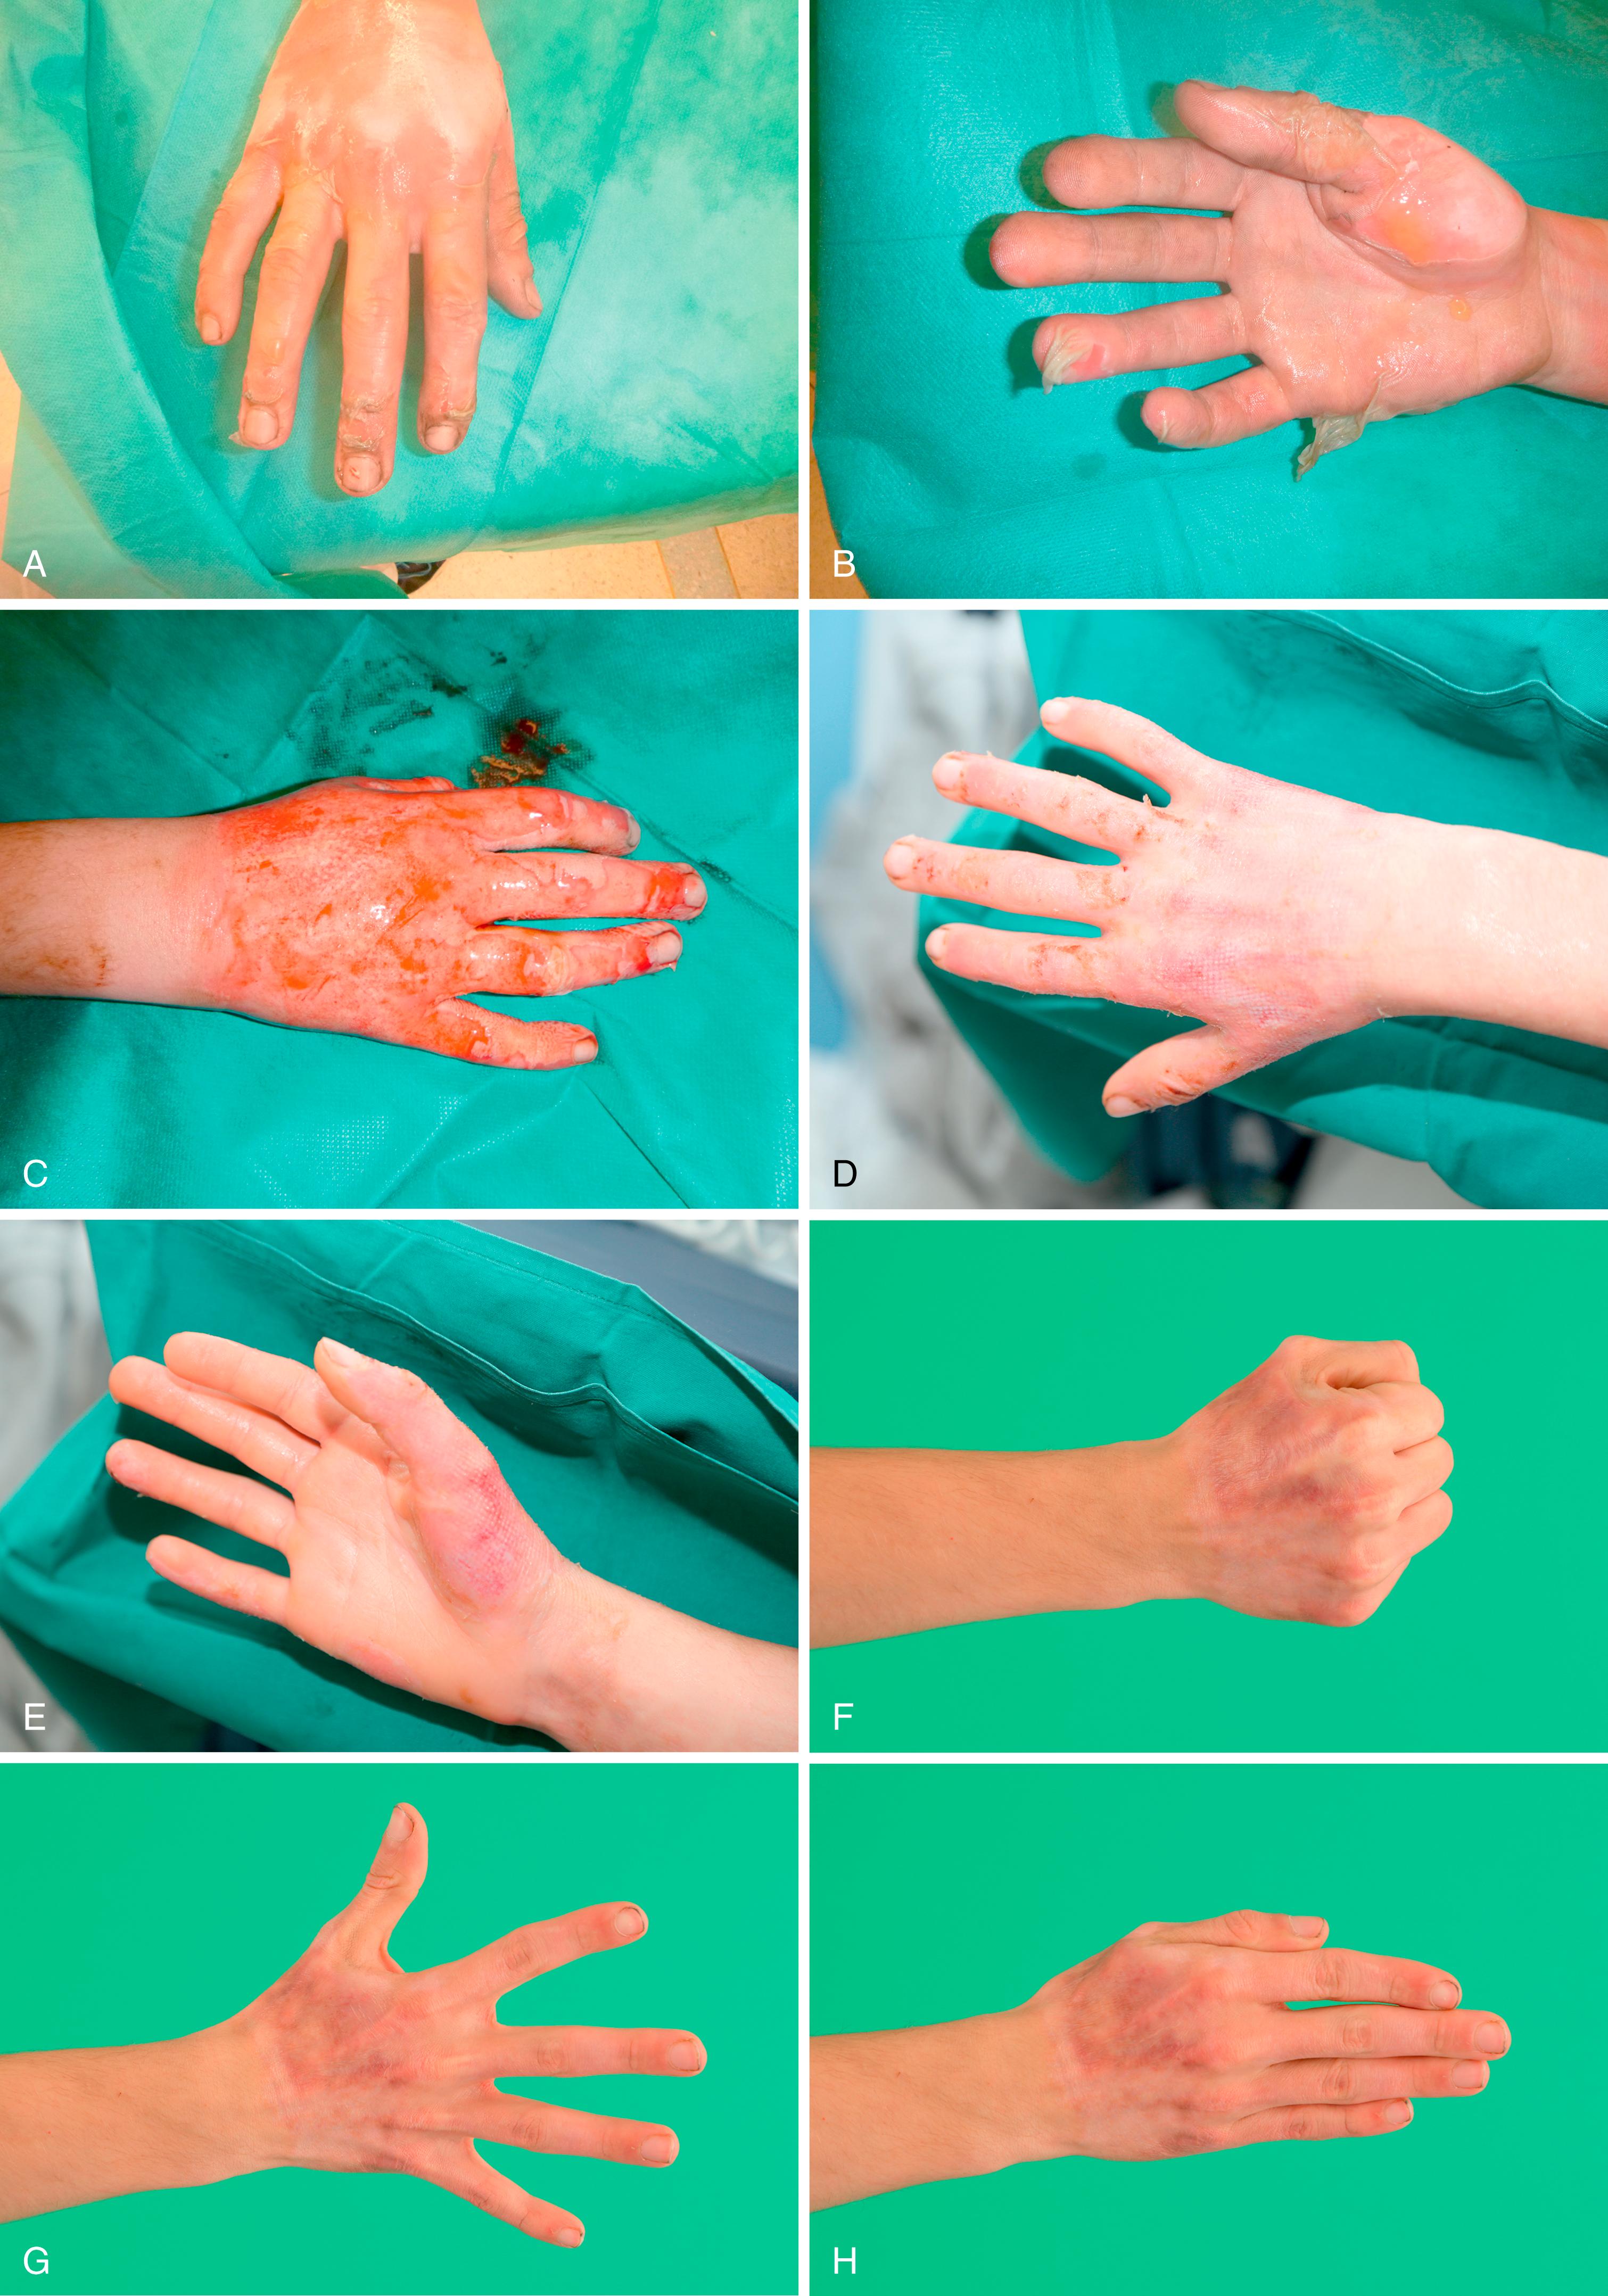 Fig. 57.7, A and B, Partial/deep partial hand burn. C, Status post enzymatic debridement with Nexobrid™. D and E, Complete epithelialization. F to H, Functional and esthetic result.